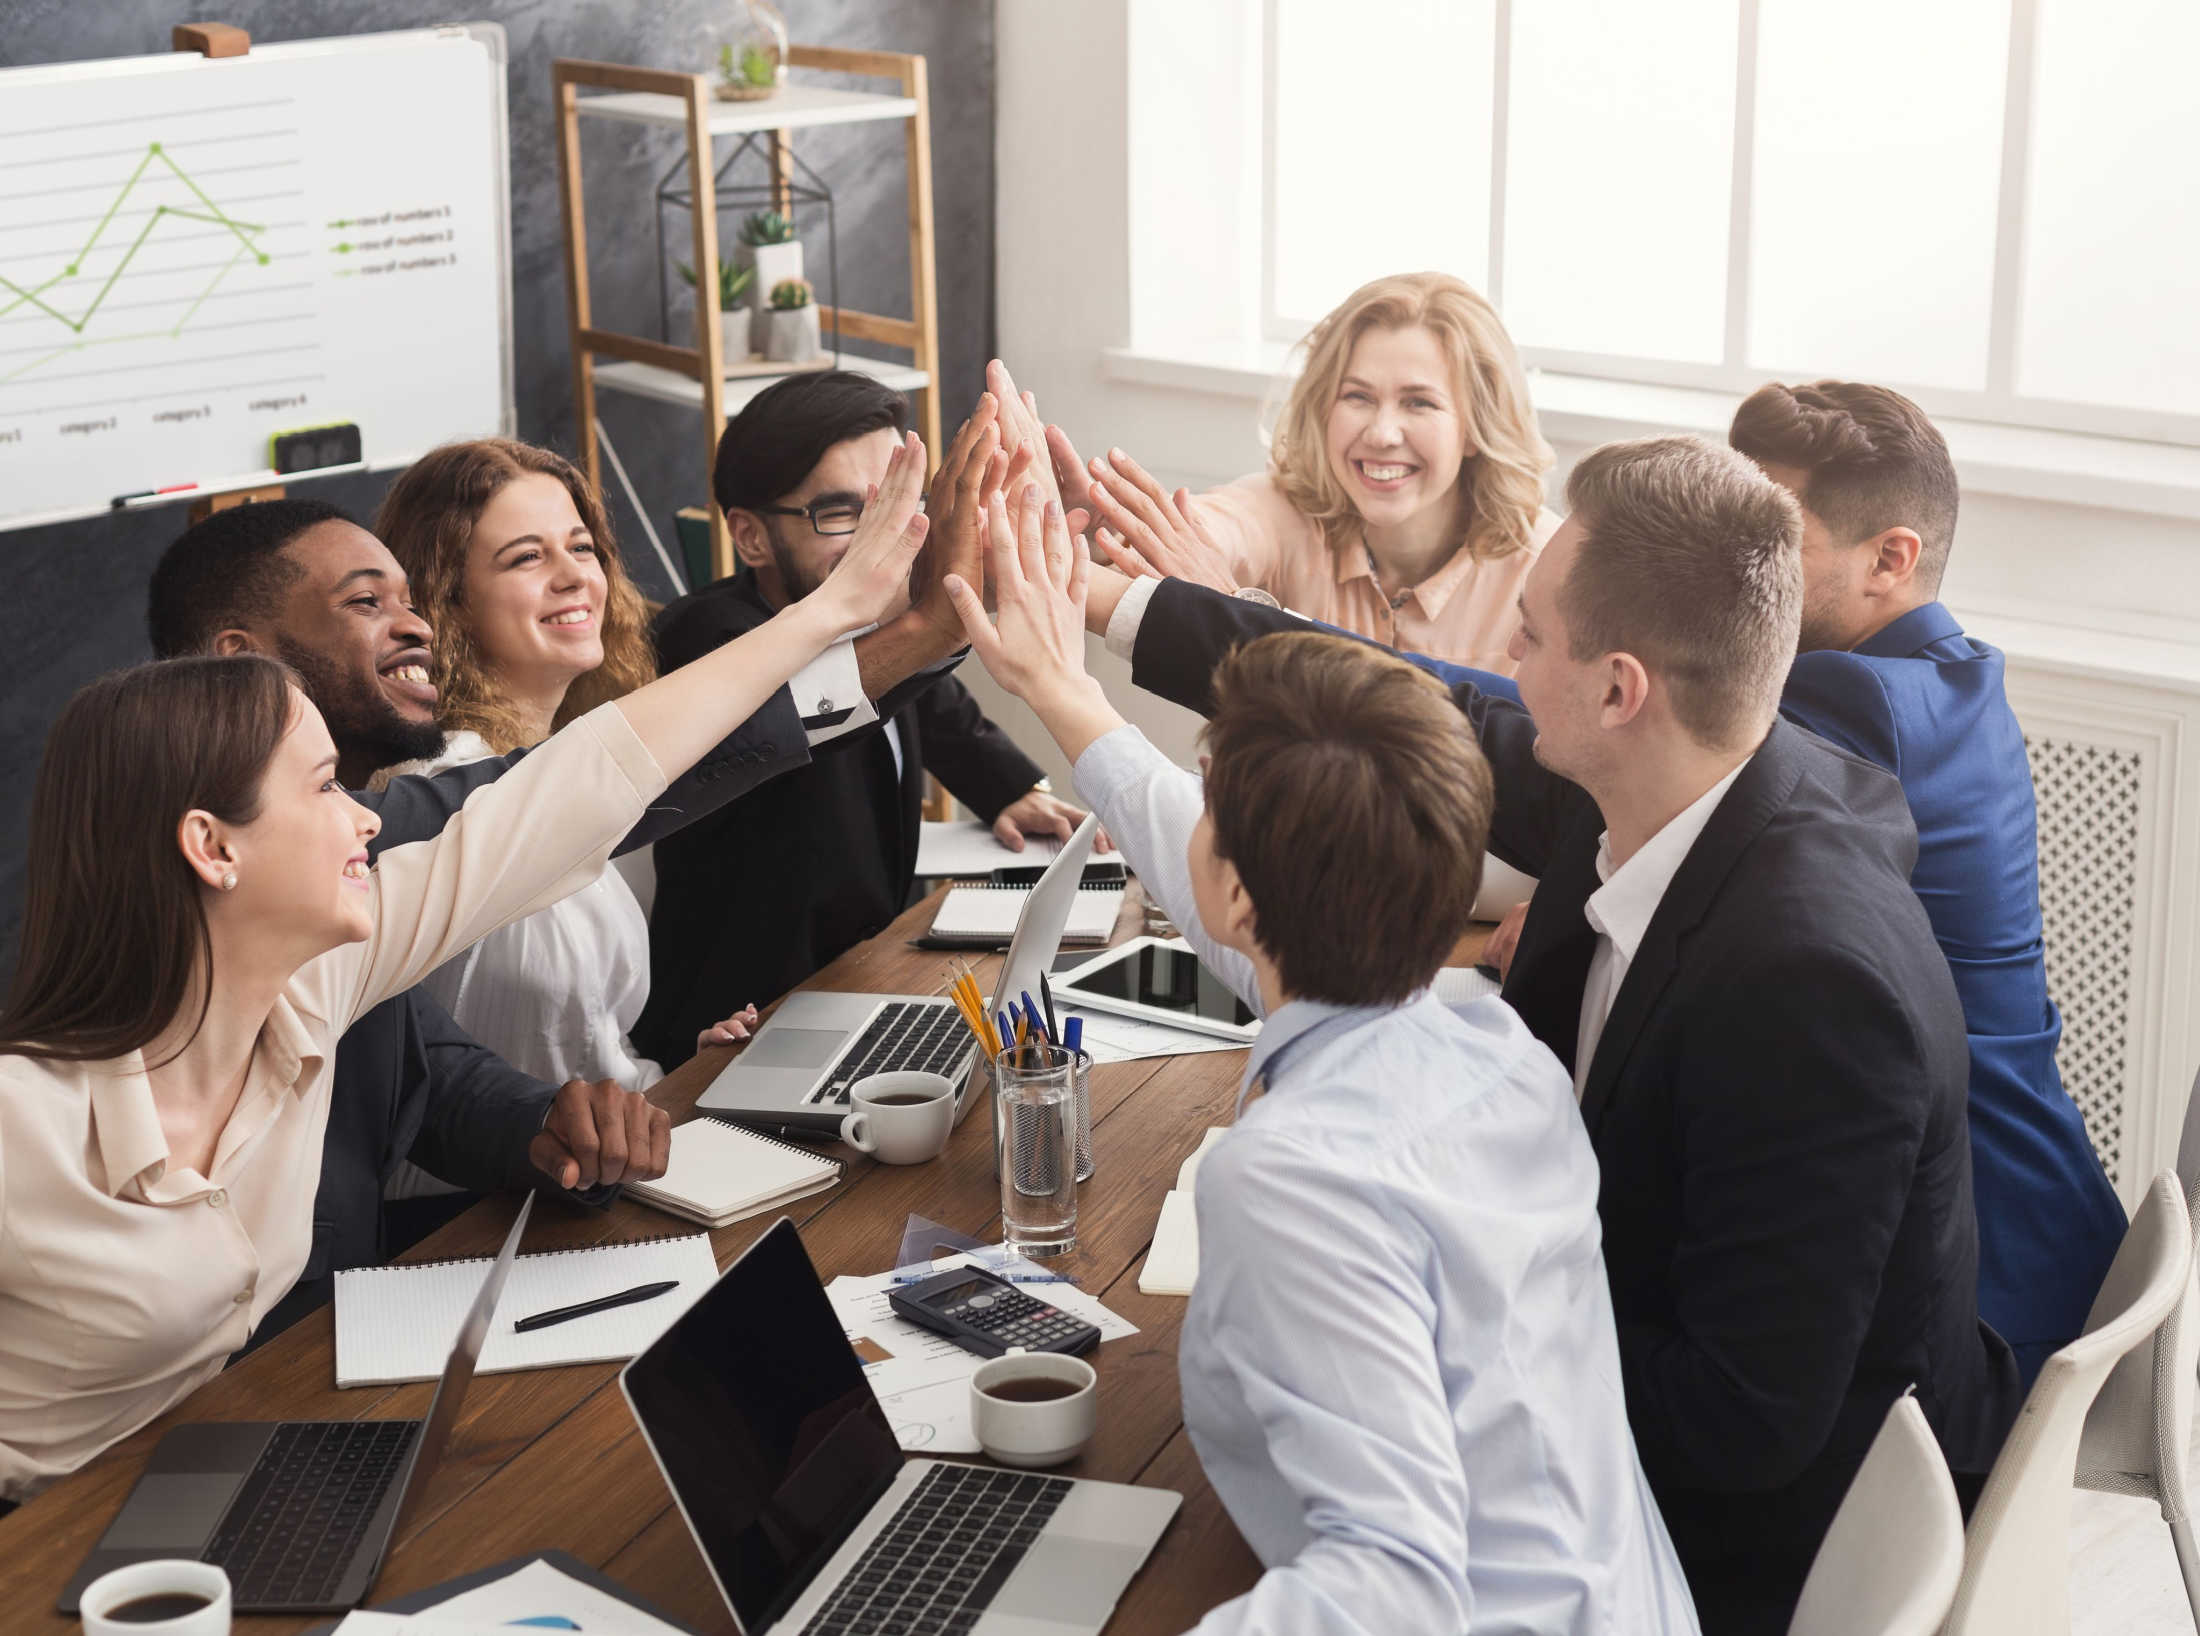 Group of co-workers high fiving success